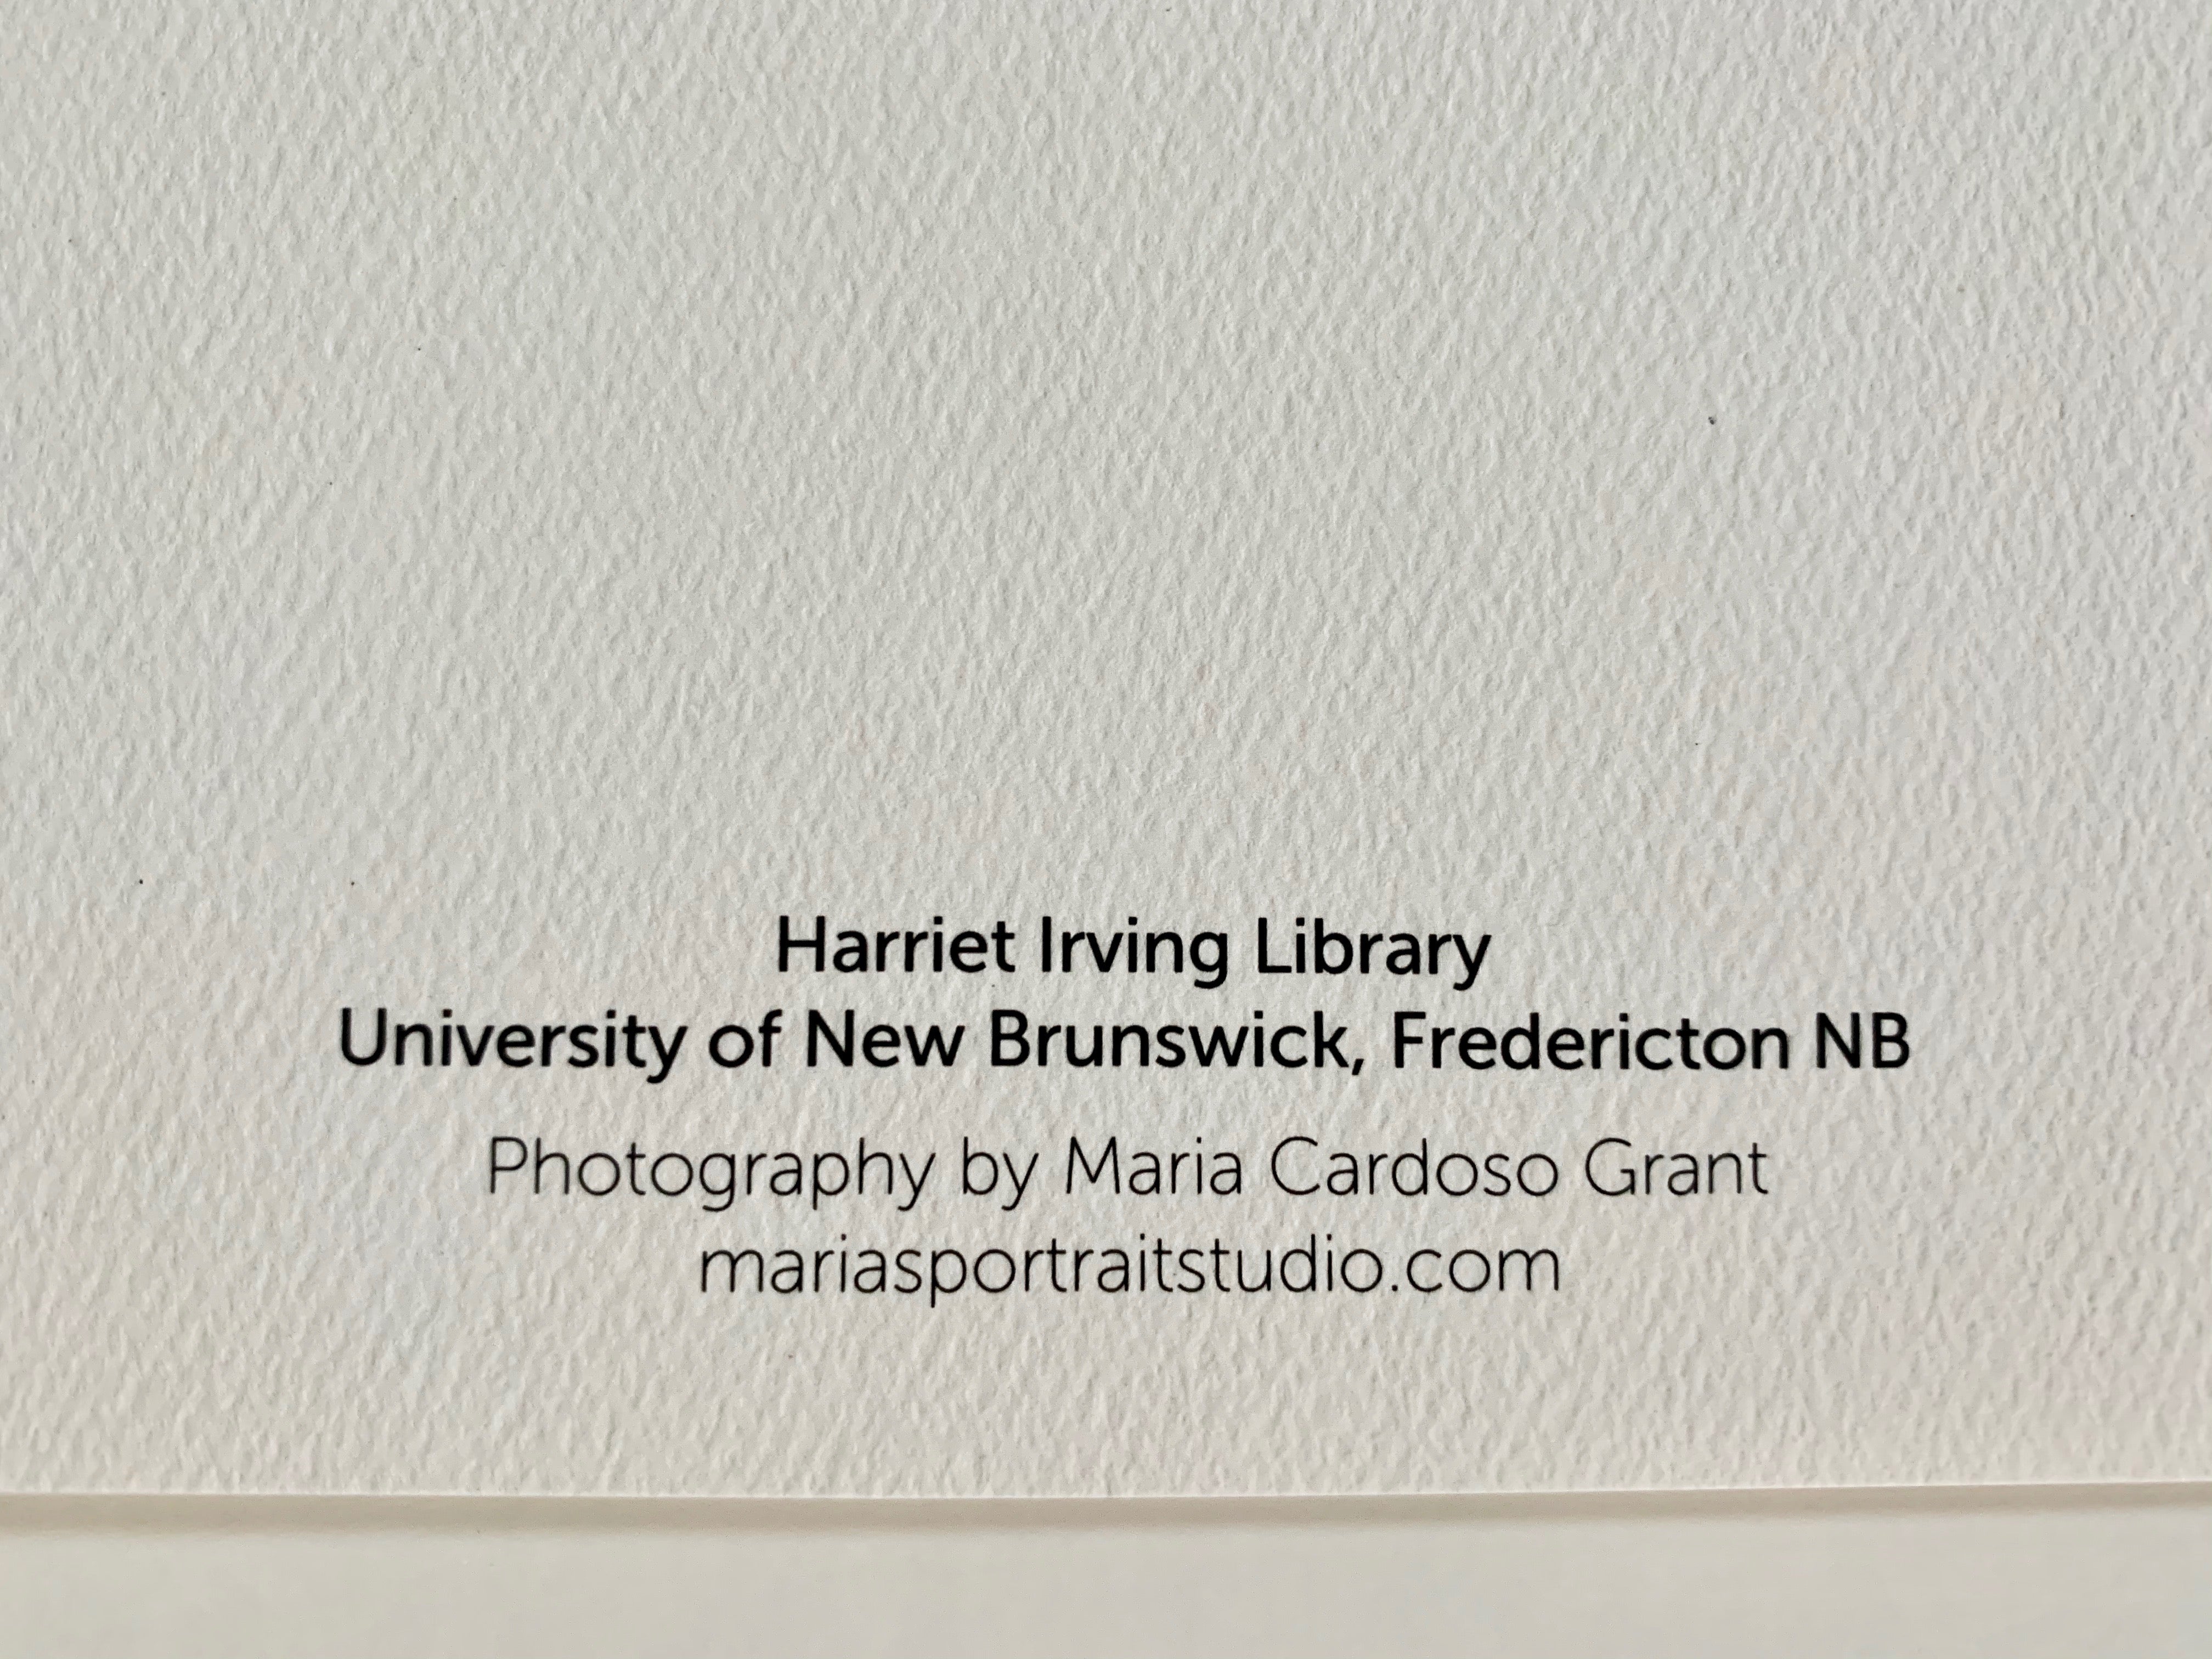 Harriet Irving Library notecards